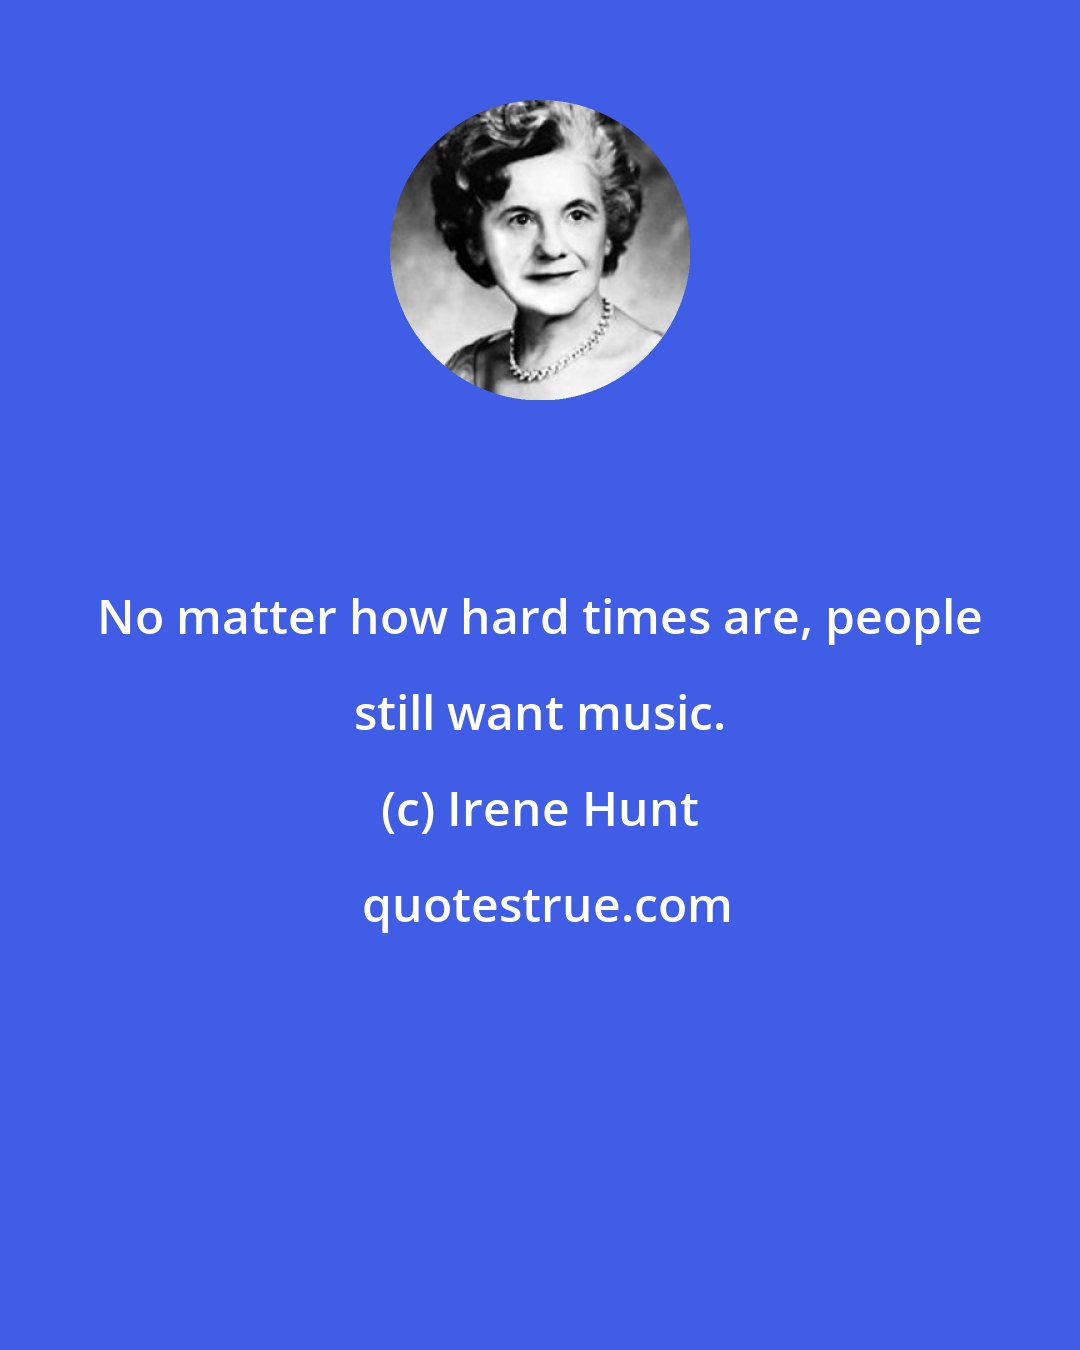 Irene Hunt: No matter how hard times are, people still want music.